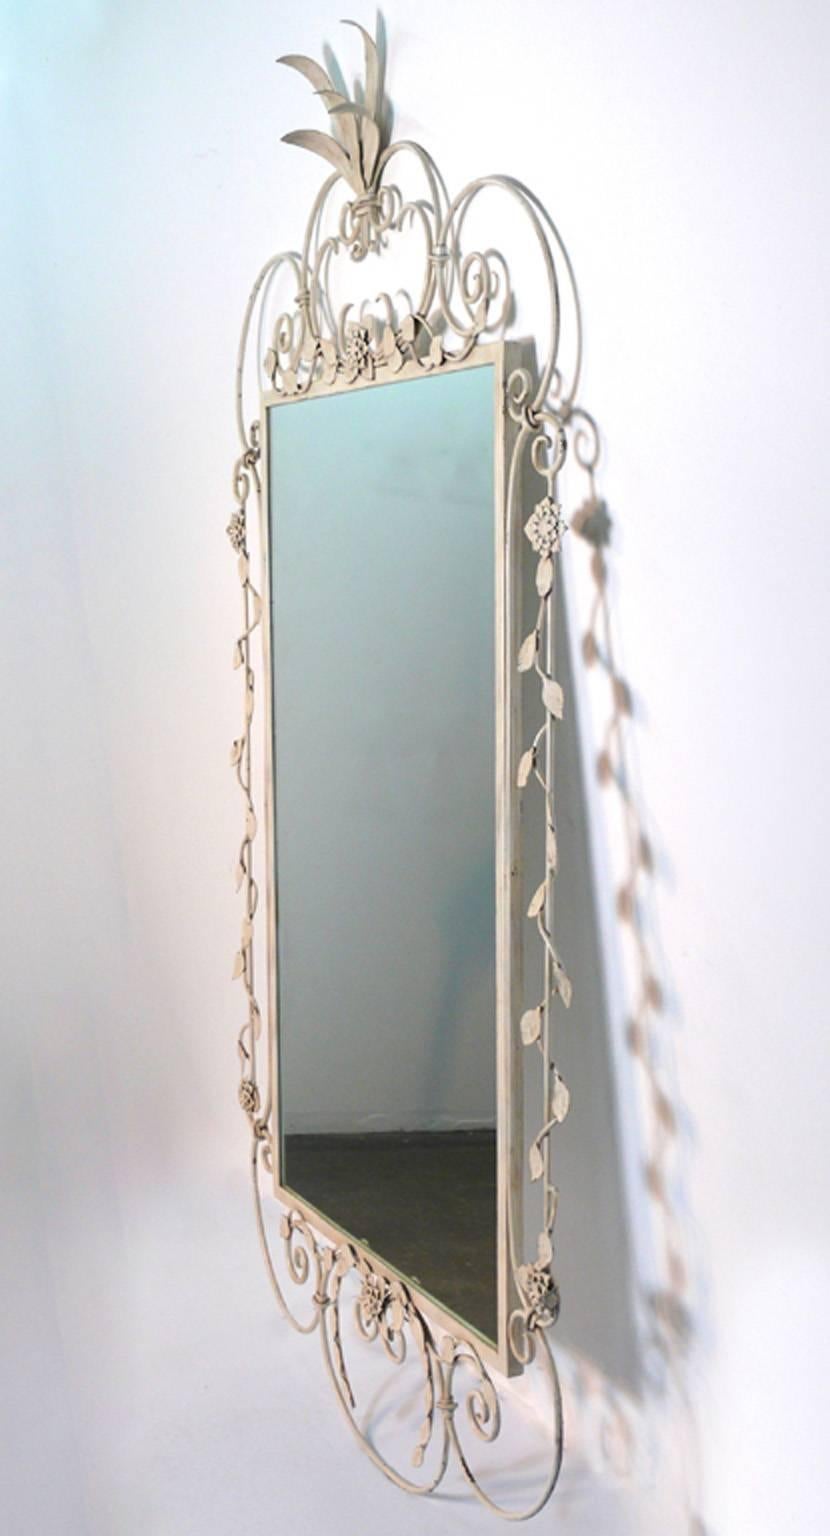 Large-scale mirror. Scrolls and leaves. Wrought Iron, 1940s.